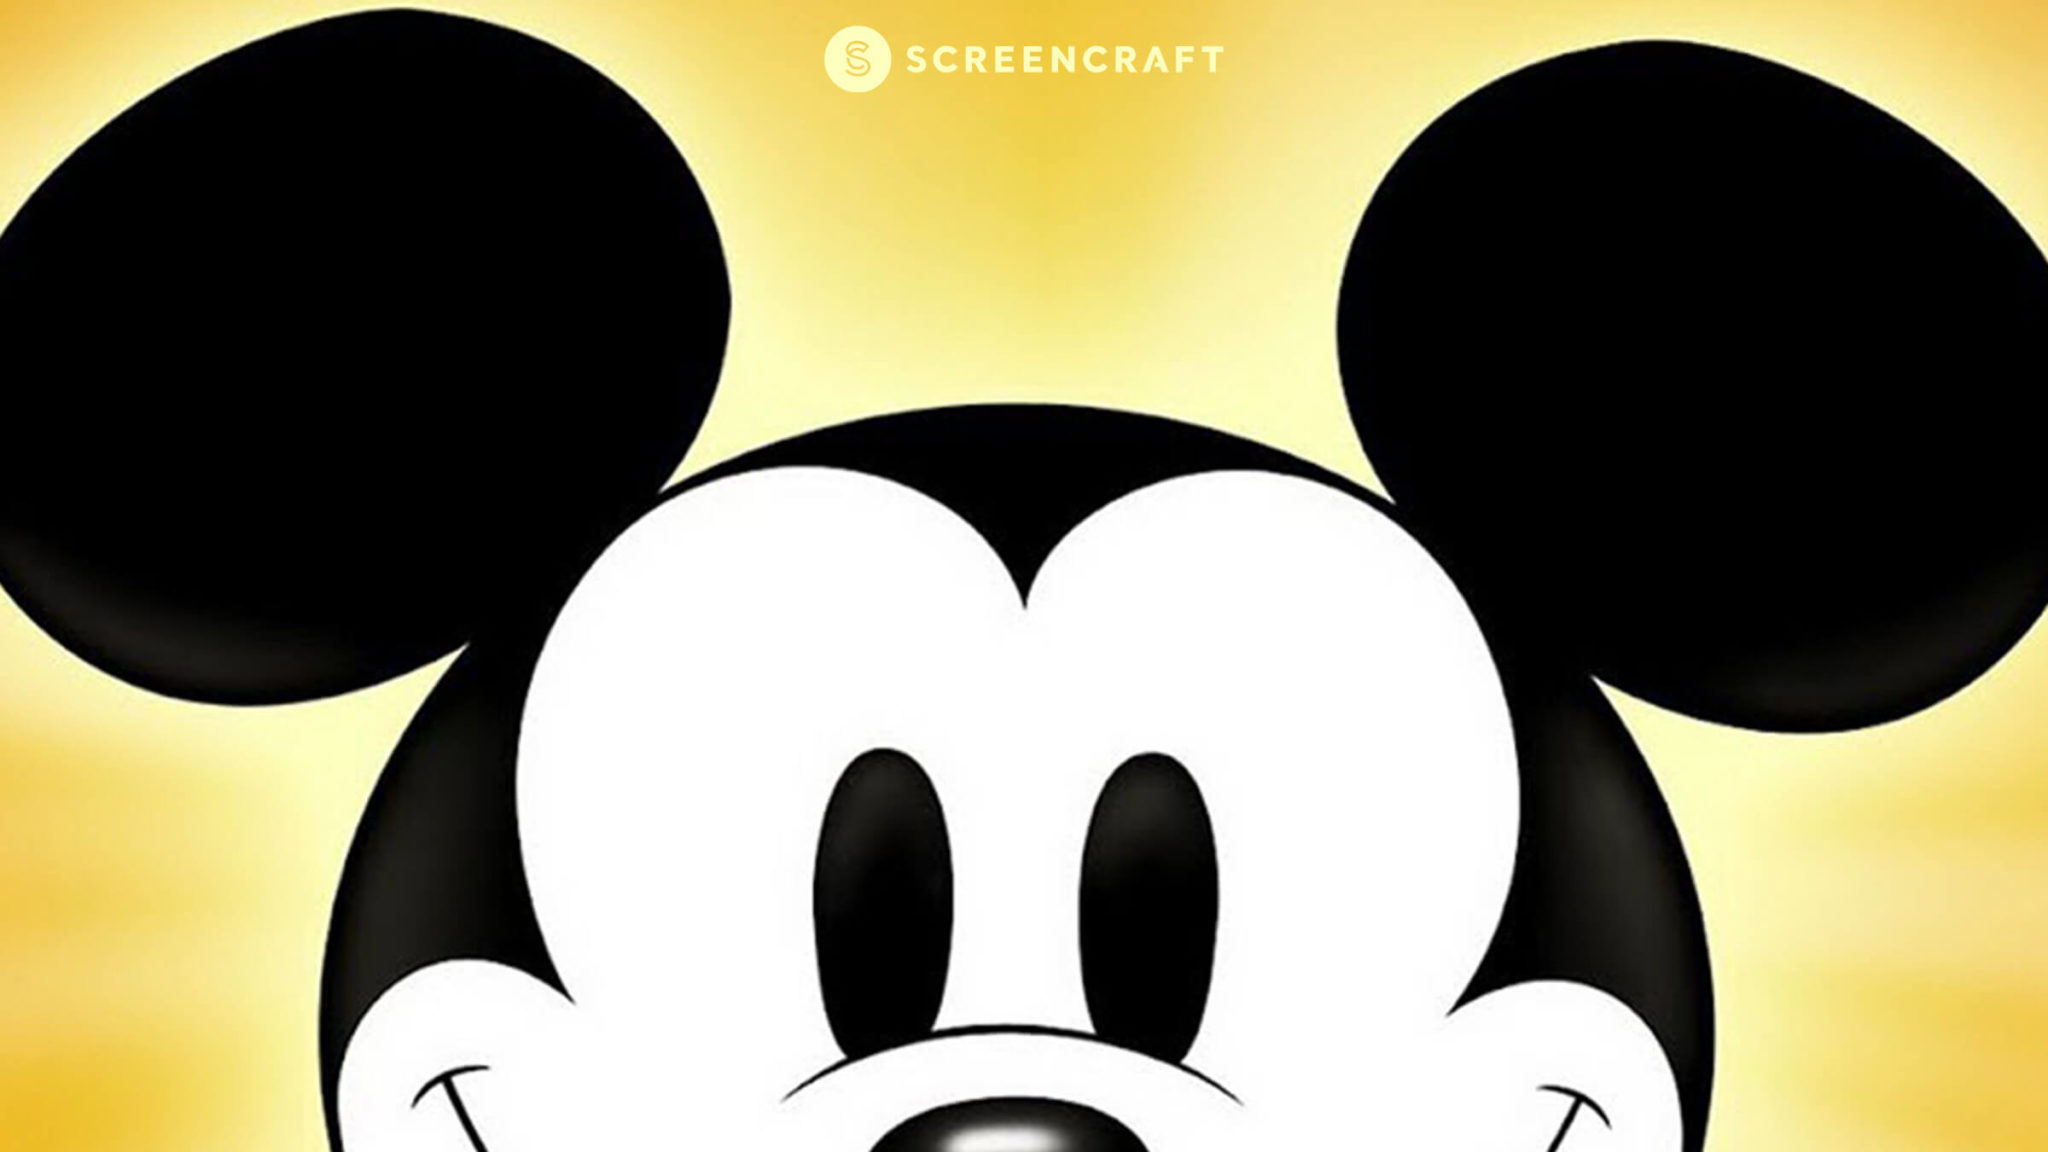 New posts in general - the Mickey mouse communuty Community on